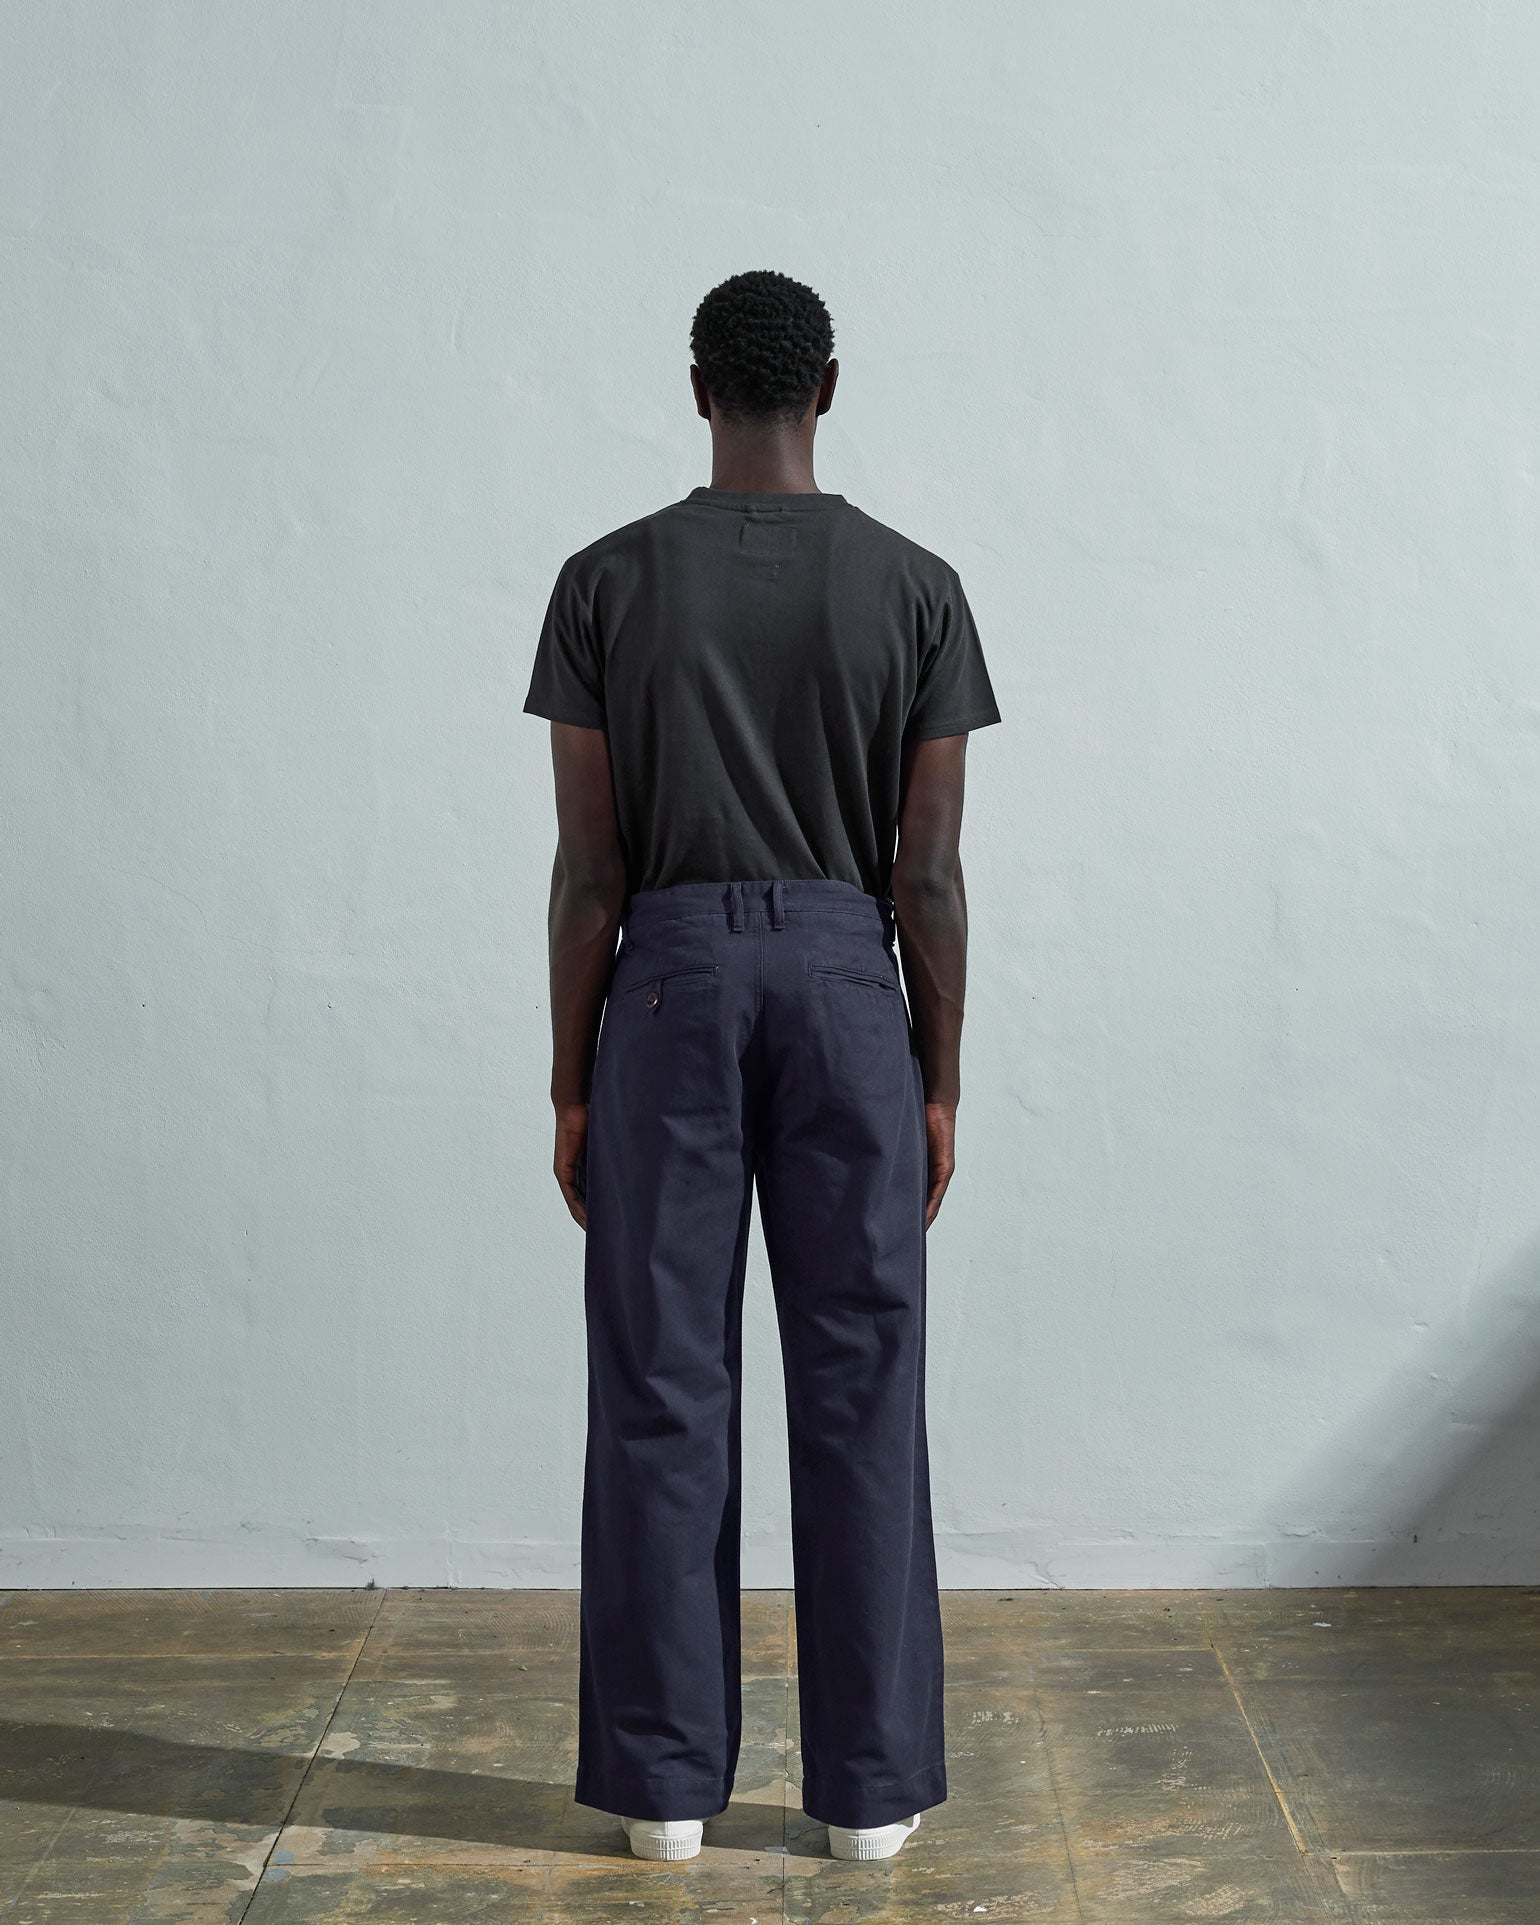 Full-length back view of model wearing #5018, midnight blue mid-weight cotton boat pants. Showing rear pockets, belt loops and vintage inspired silhouette.